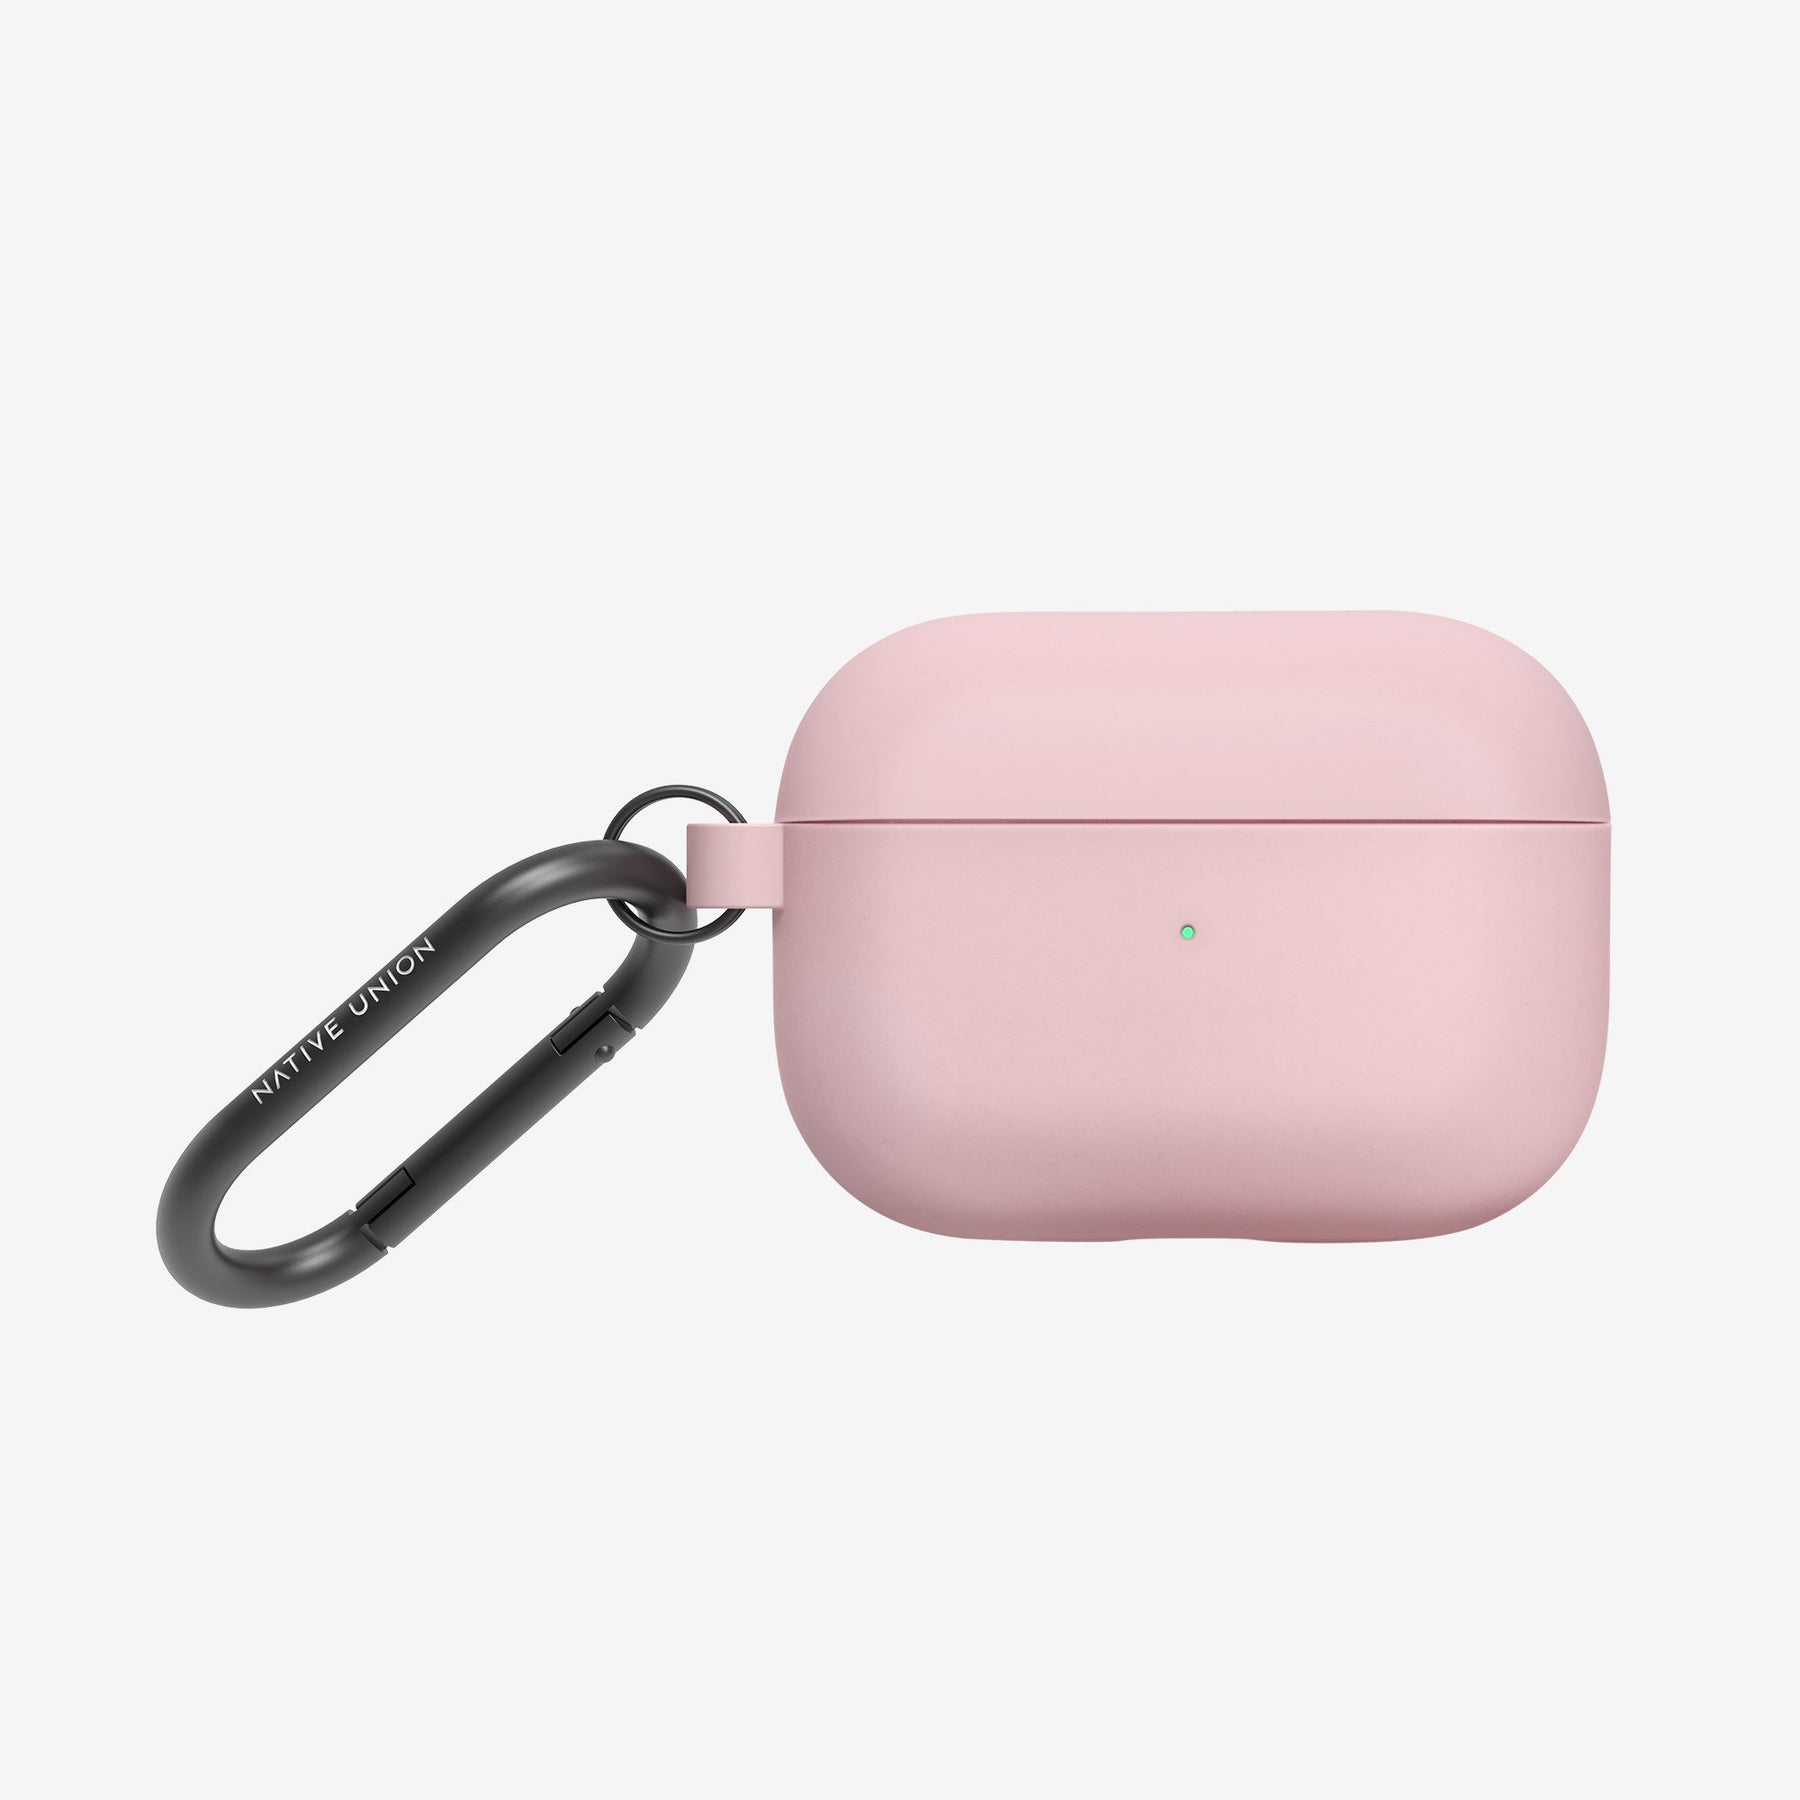 Roam Case for AirPods Pro